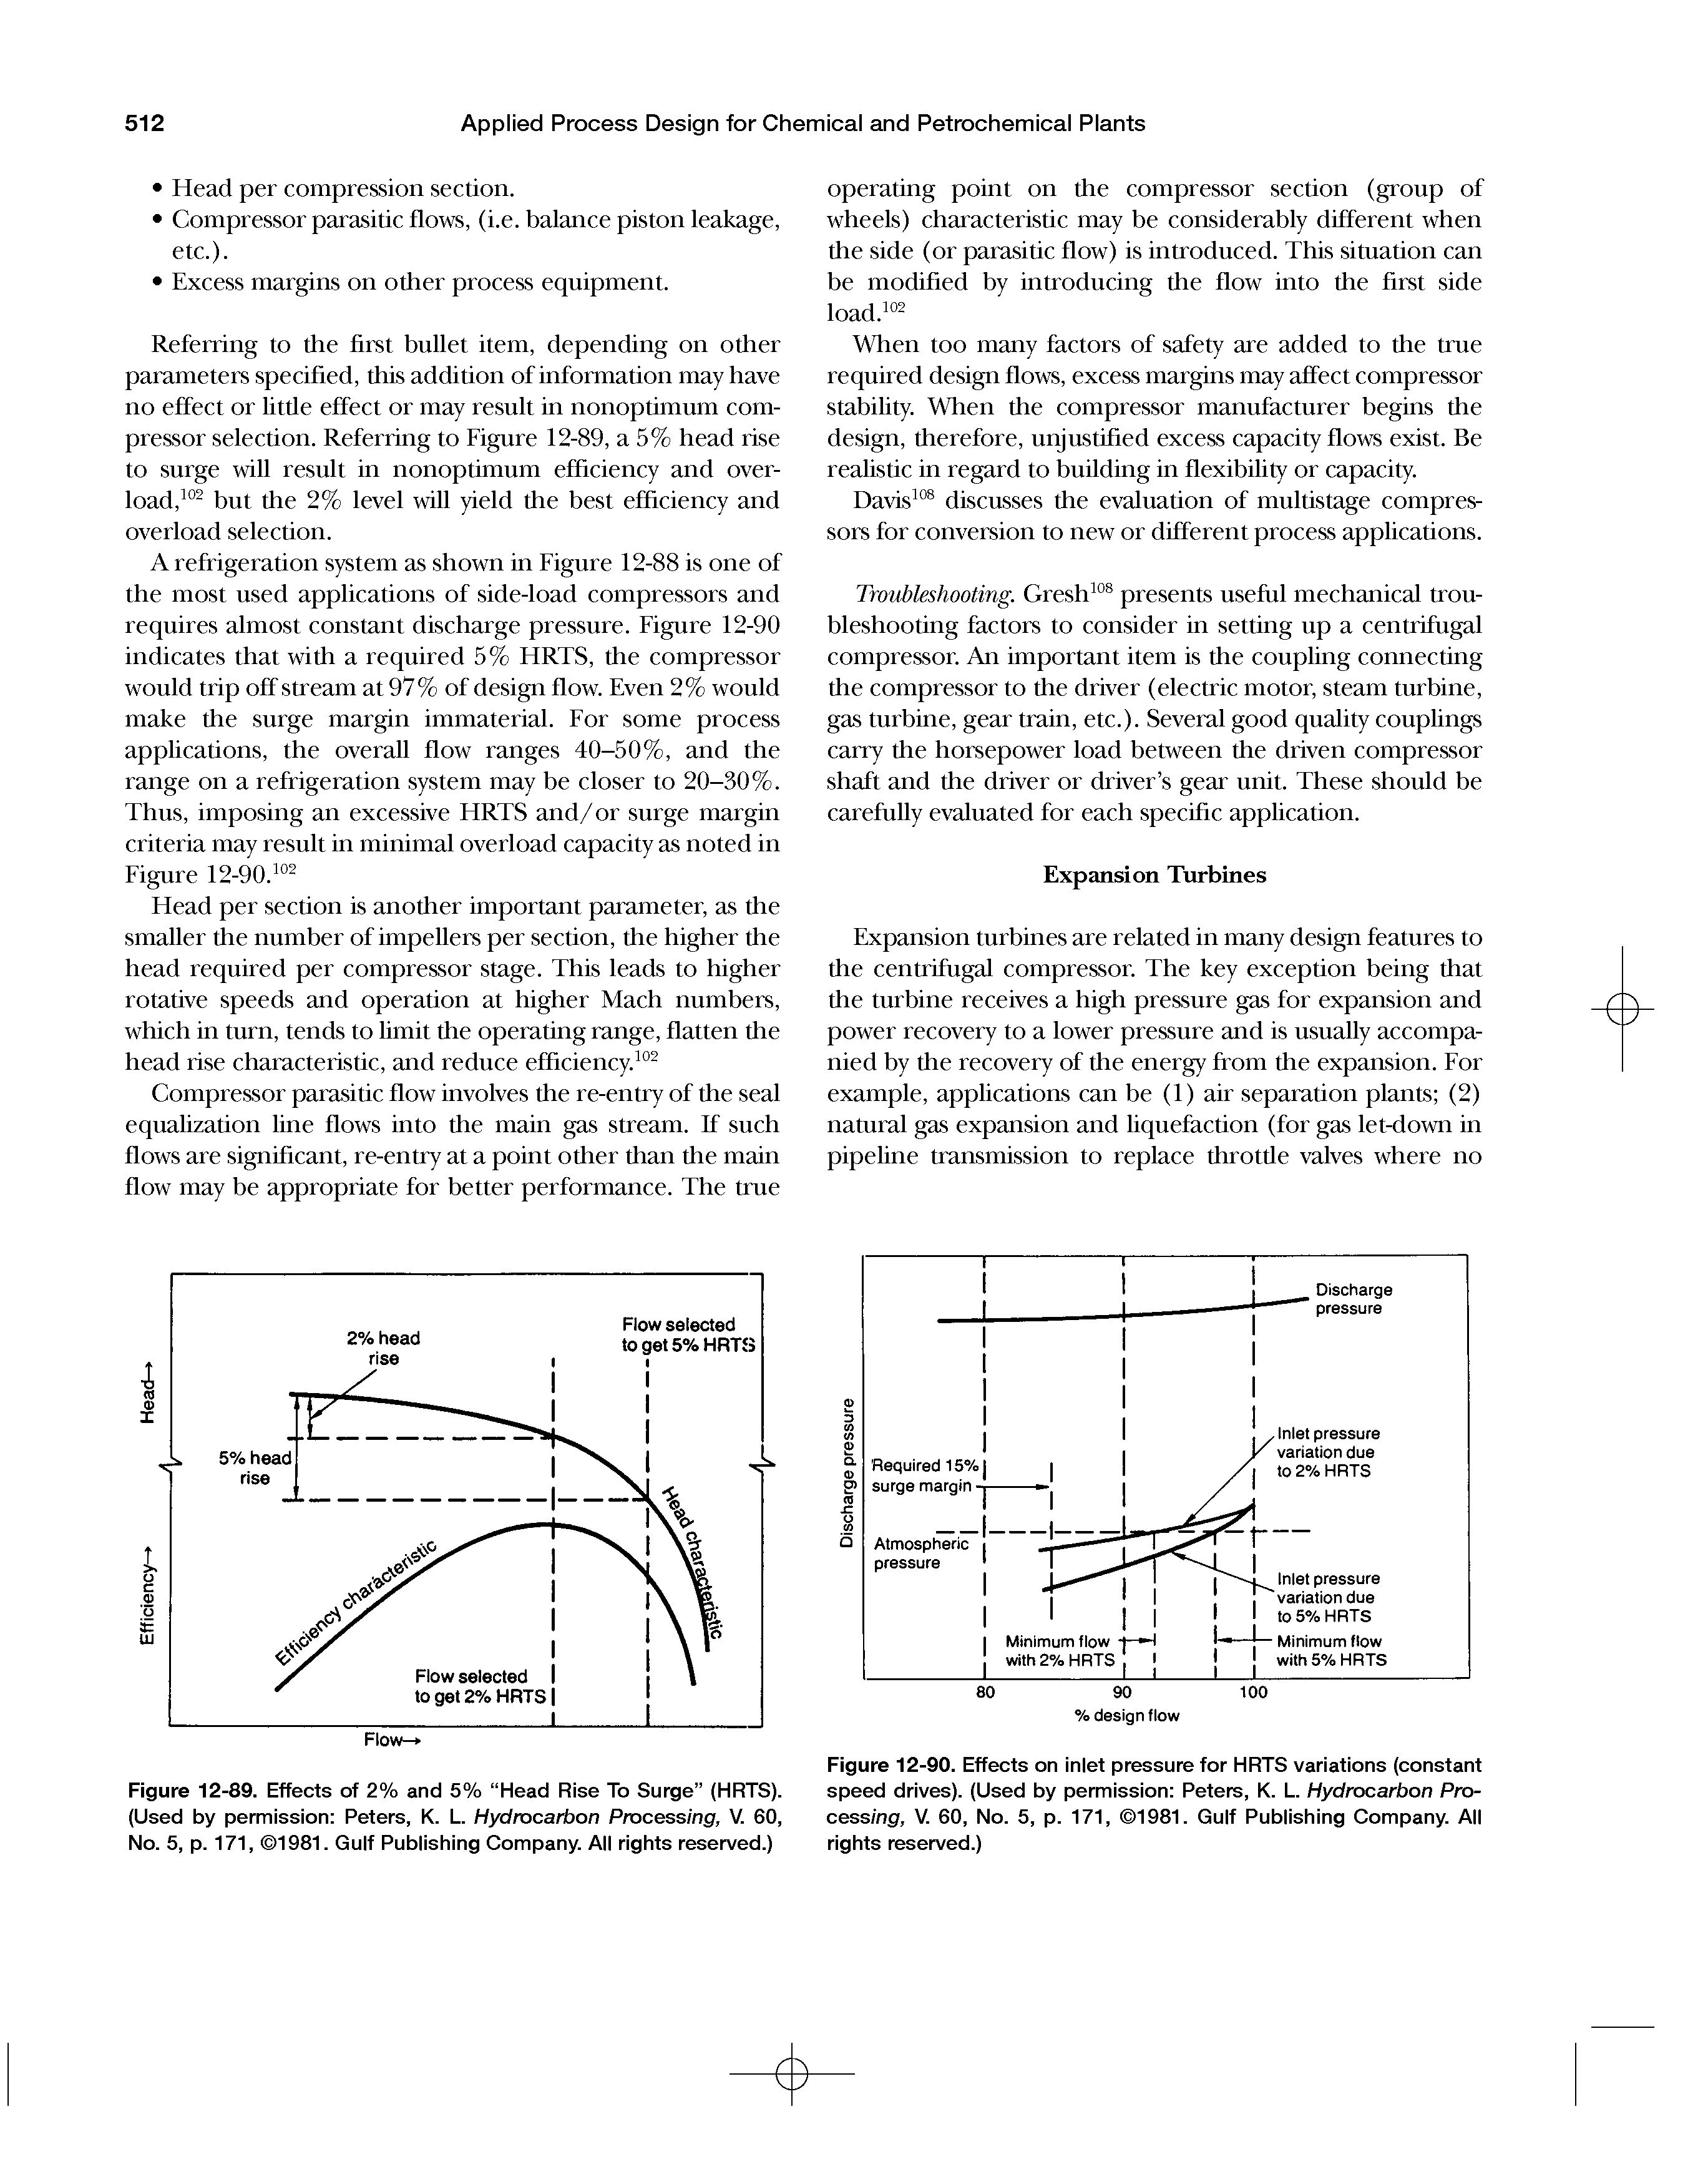 Figure 12-90. Effects on inlet pressure for HRTS variations (constant speed drives). (Used by permission Peters, K. L. Hydrocarbon Processing, V. 60, No. 5, p. 171, 1981. Gulf Publishing Company. All rights reserved.)...